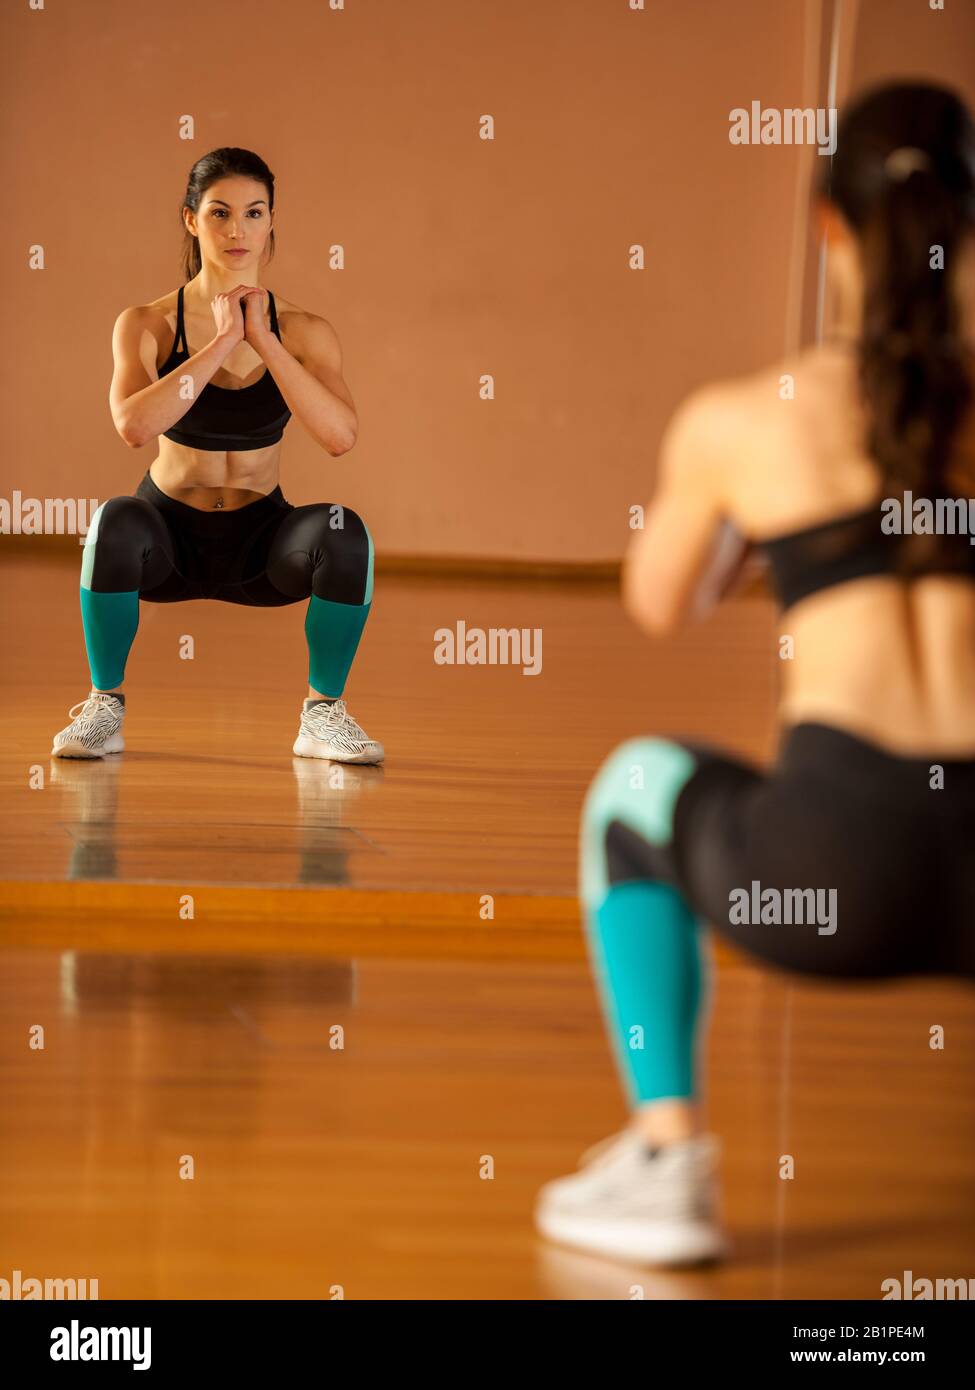 Beautiful fit woman making squats in gym Stock Photo